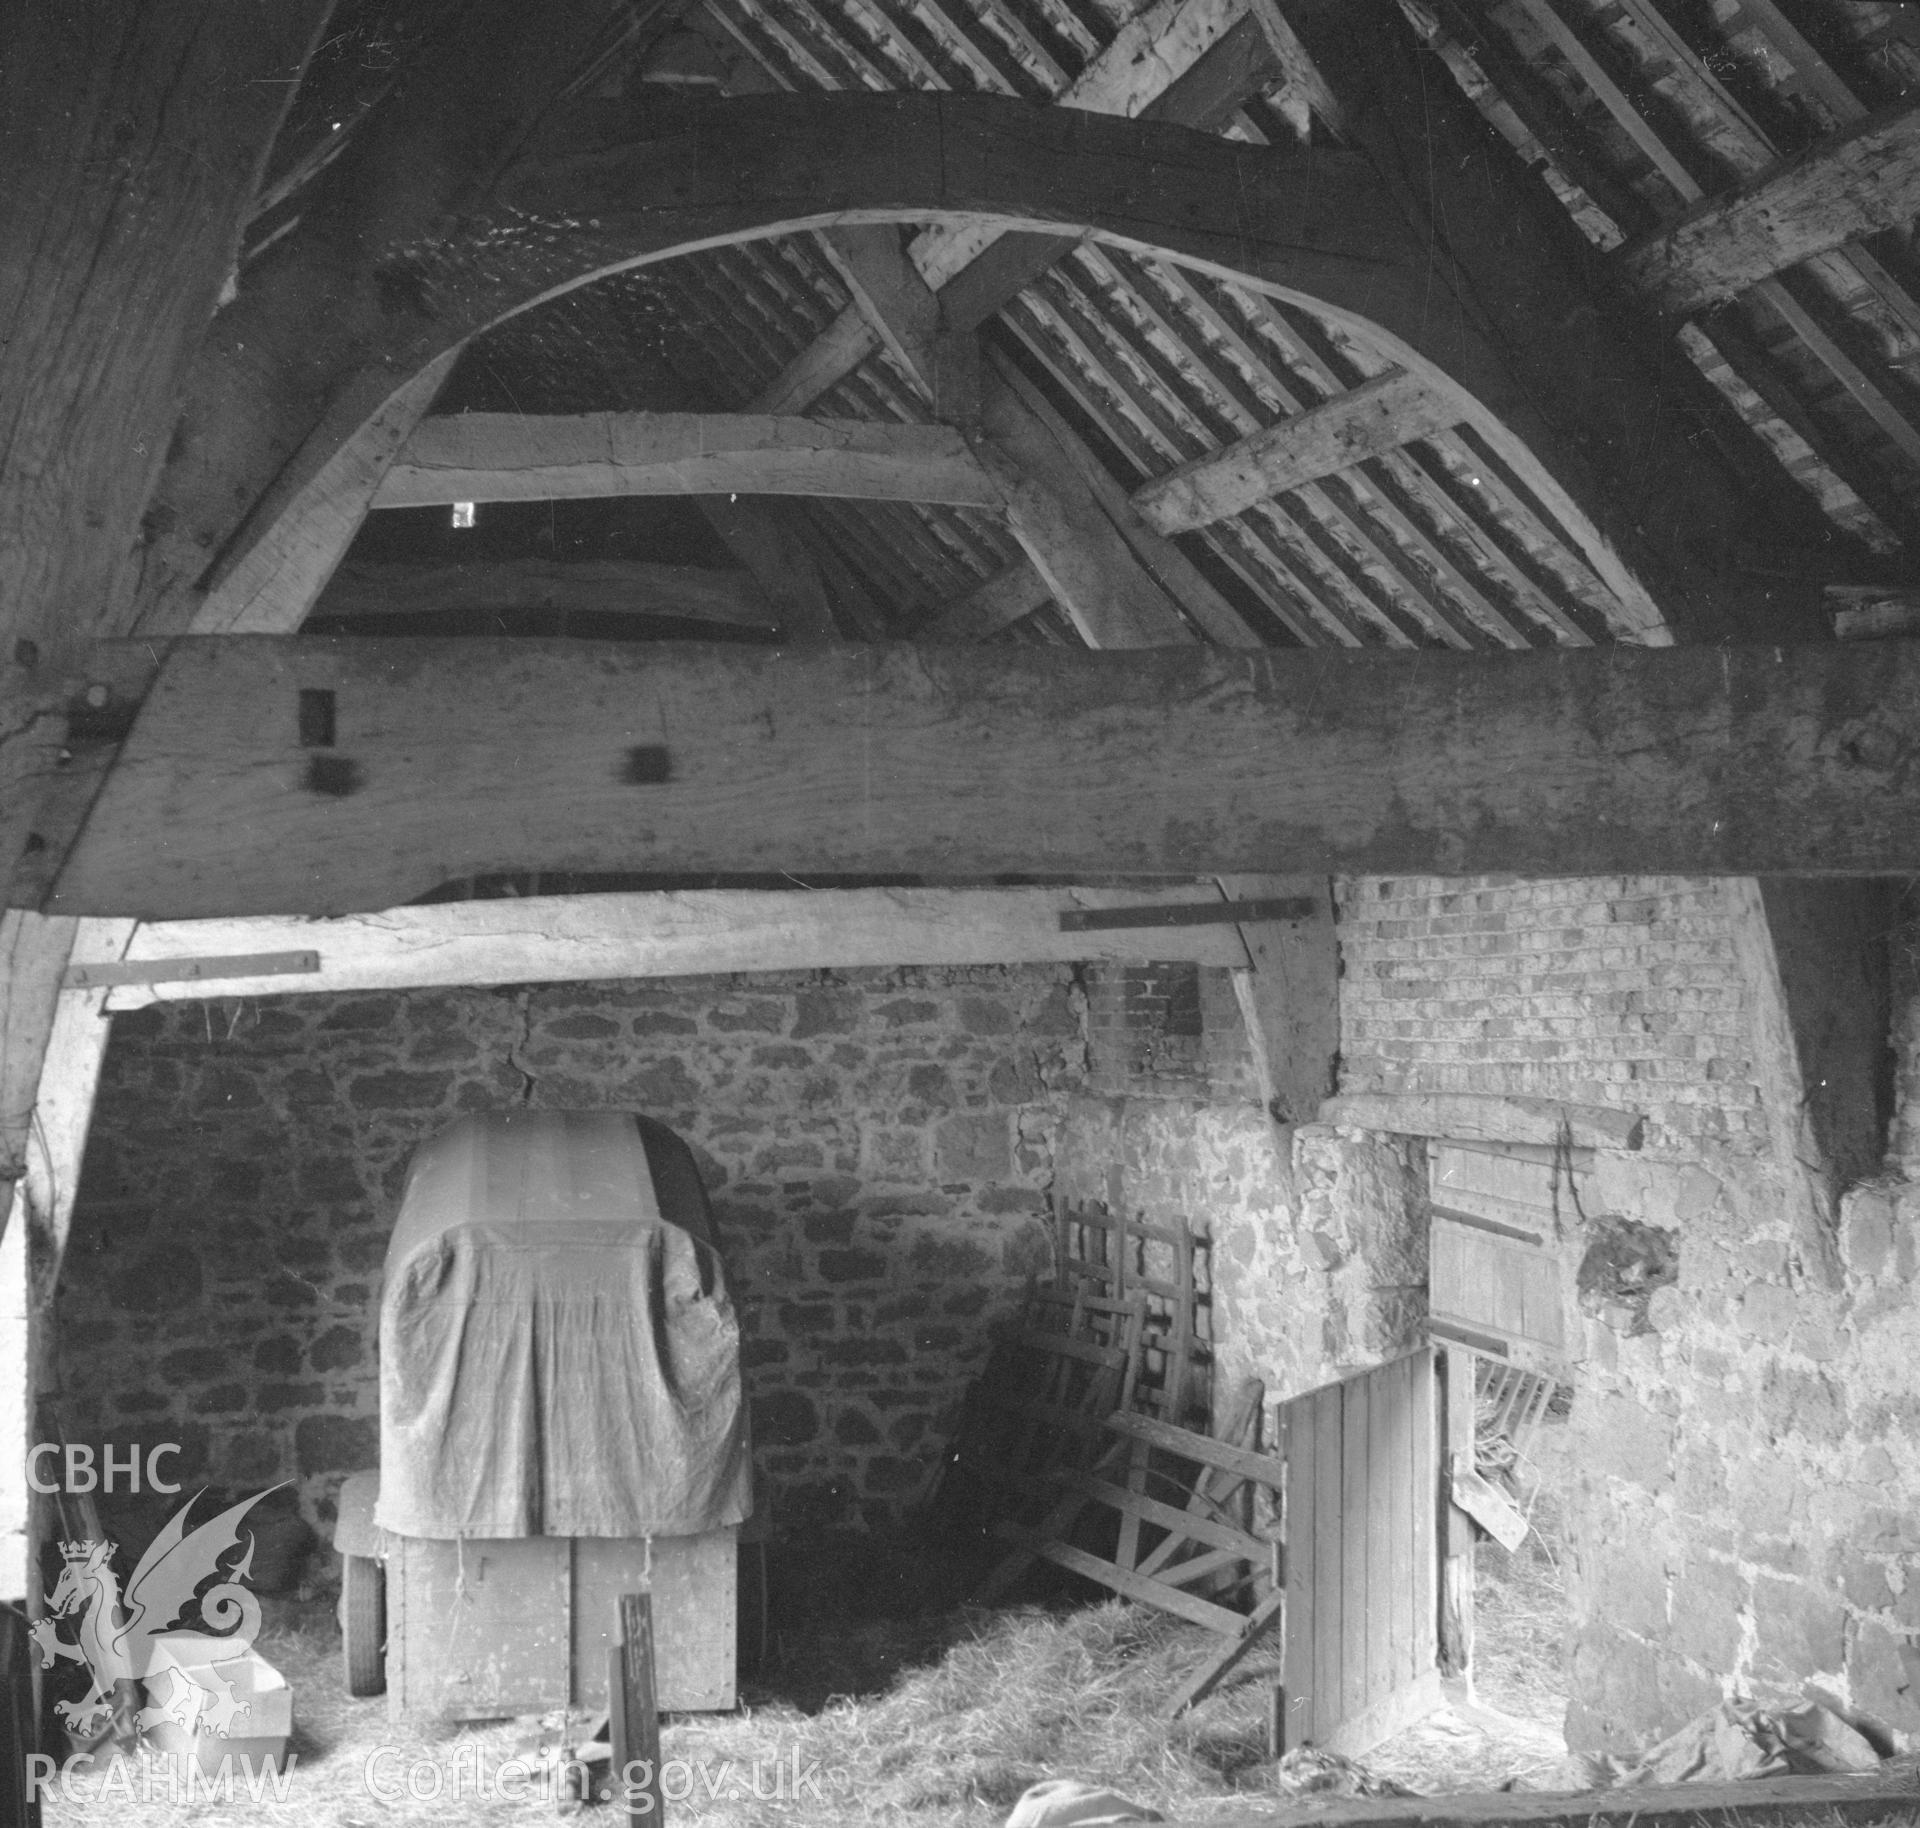 Digital copy of a black and white nitrate negative showing cruck timbers in the barn at Rhual.